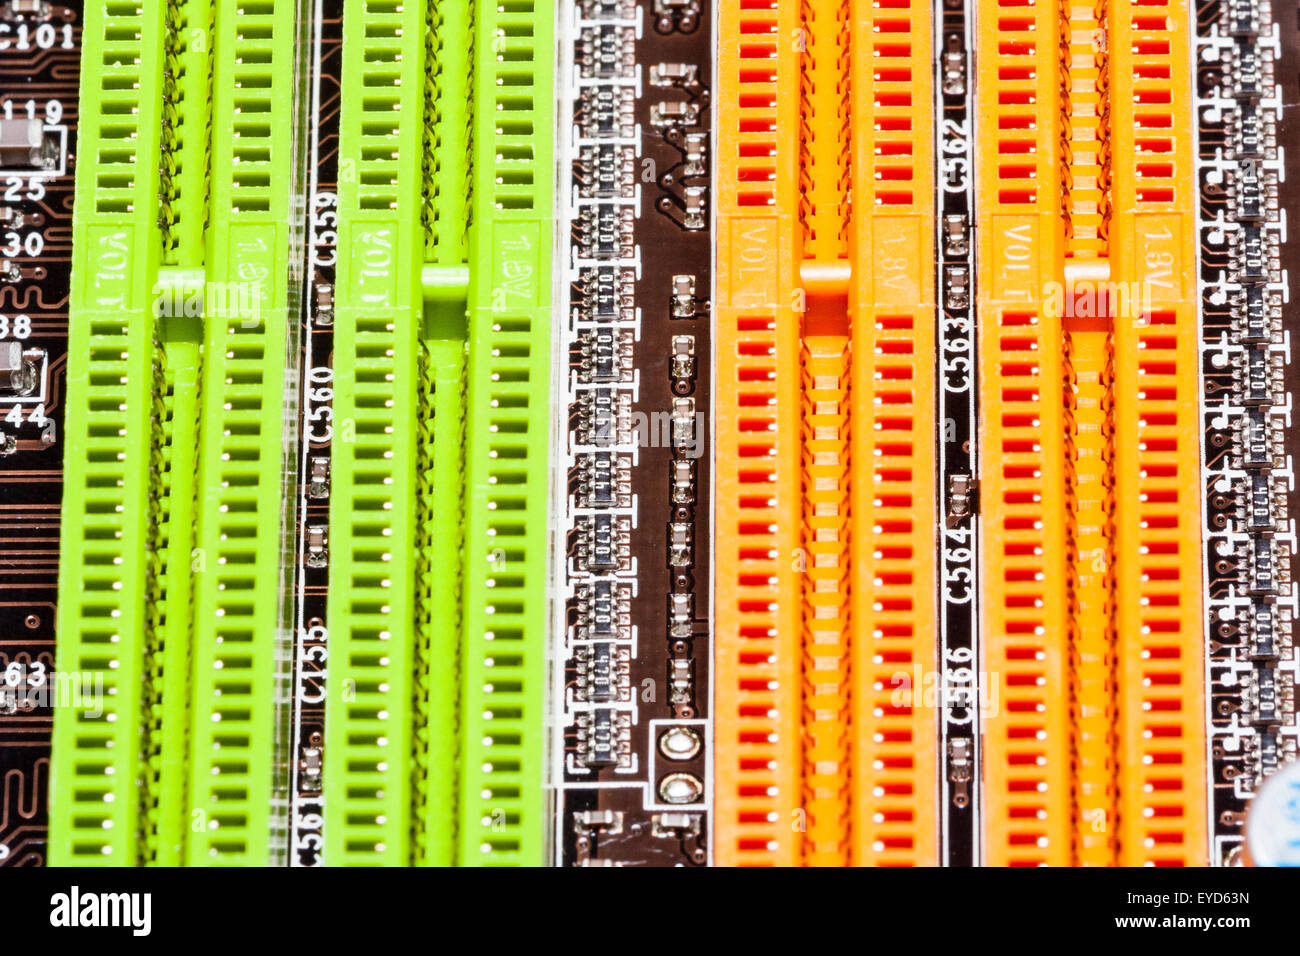 Home computer motherboard detail. Empty DIMM Ram memory slots on  motherboard, colour coded orange and green. Stock Photo